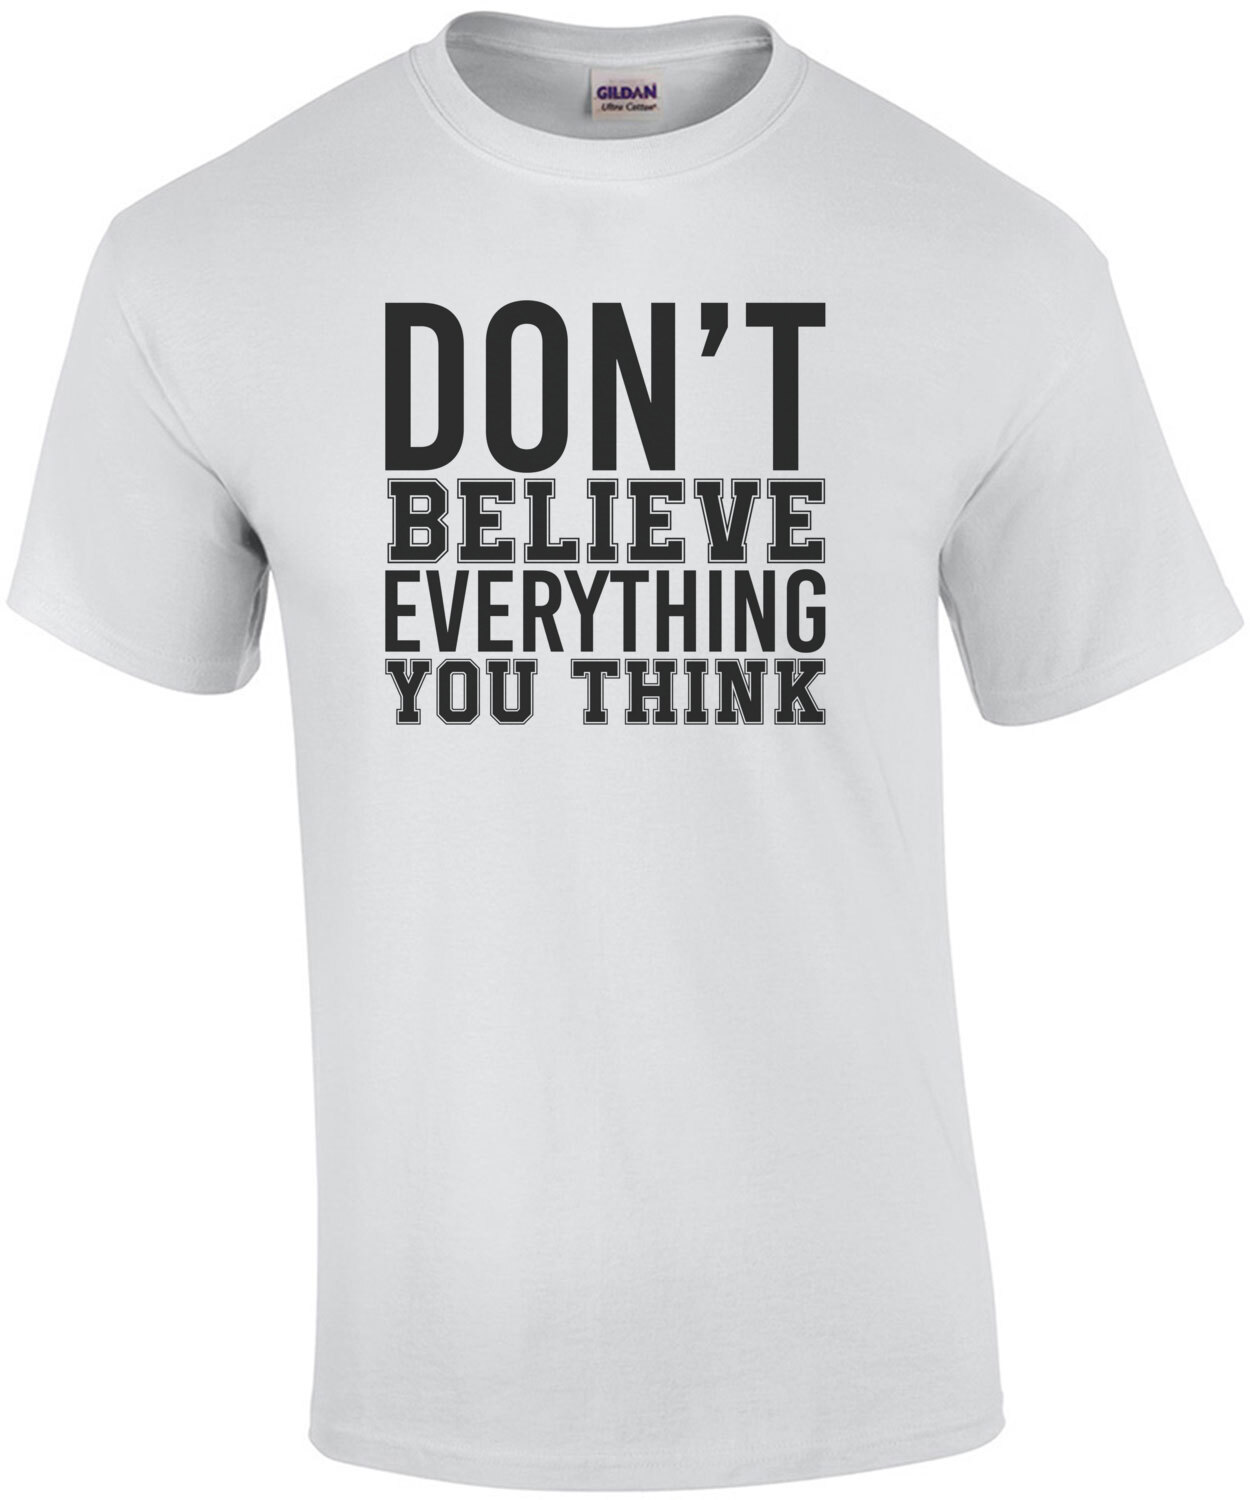 Don't believe everything you think - funny t-shirt